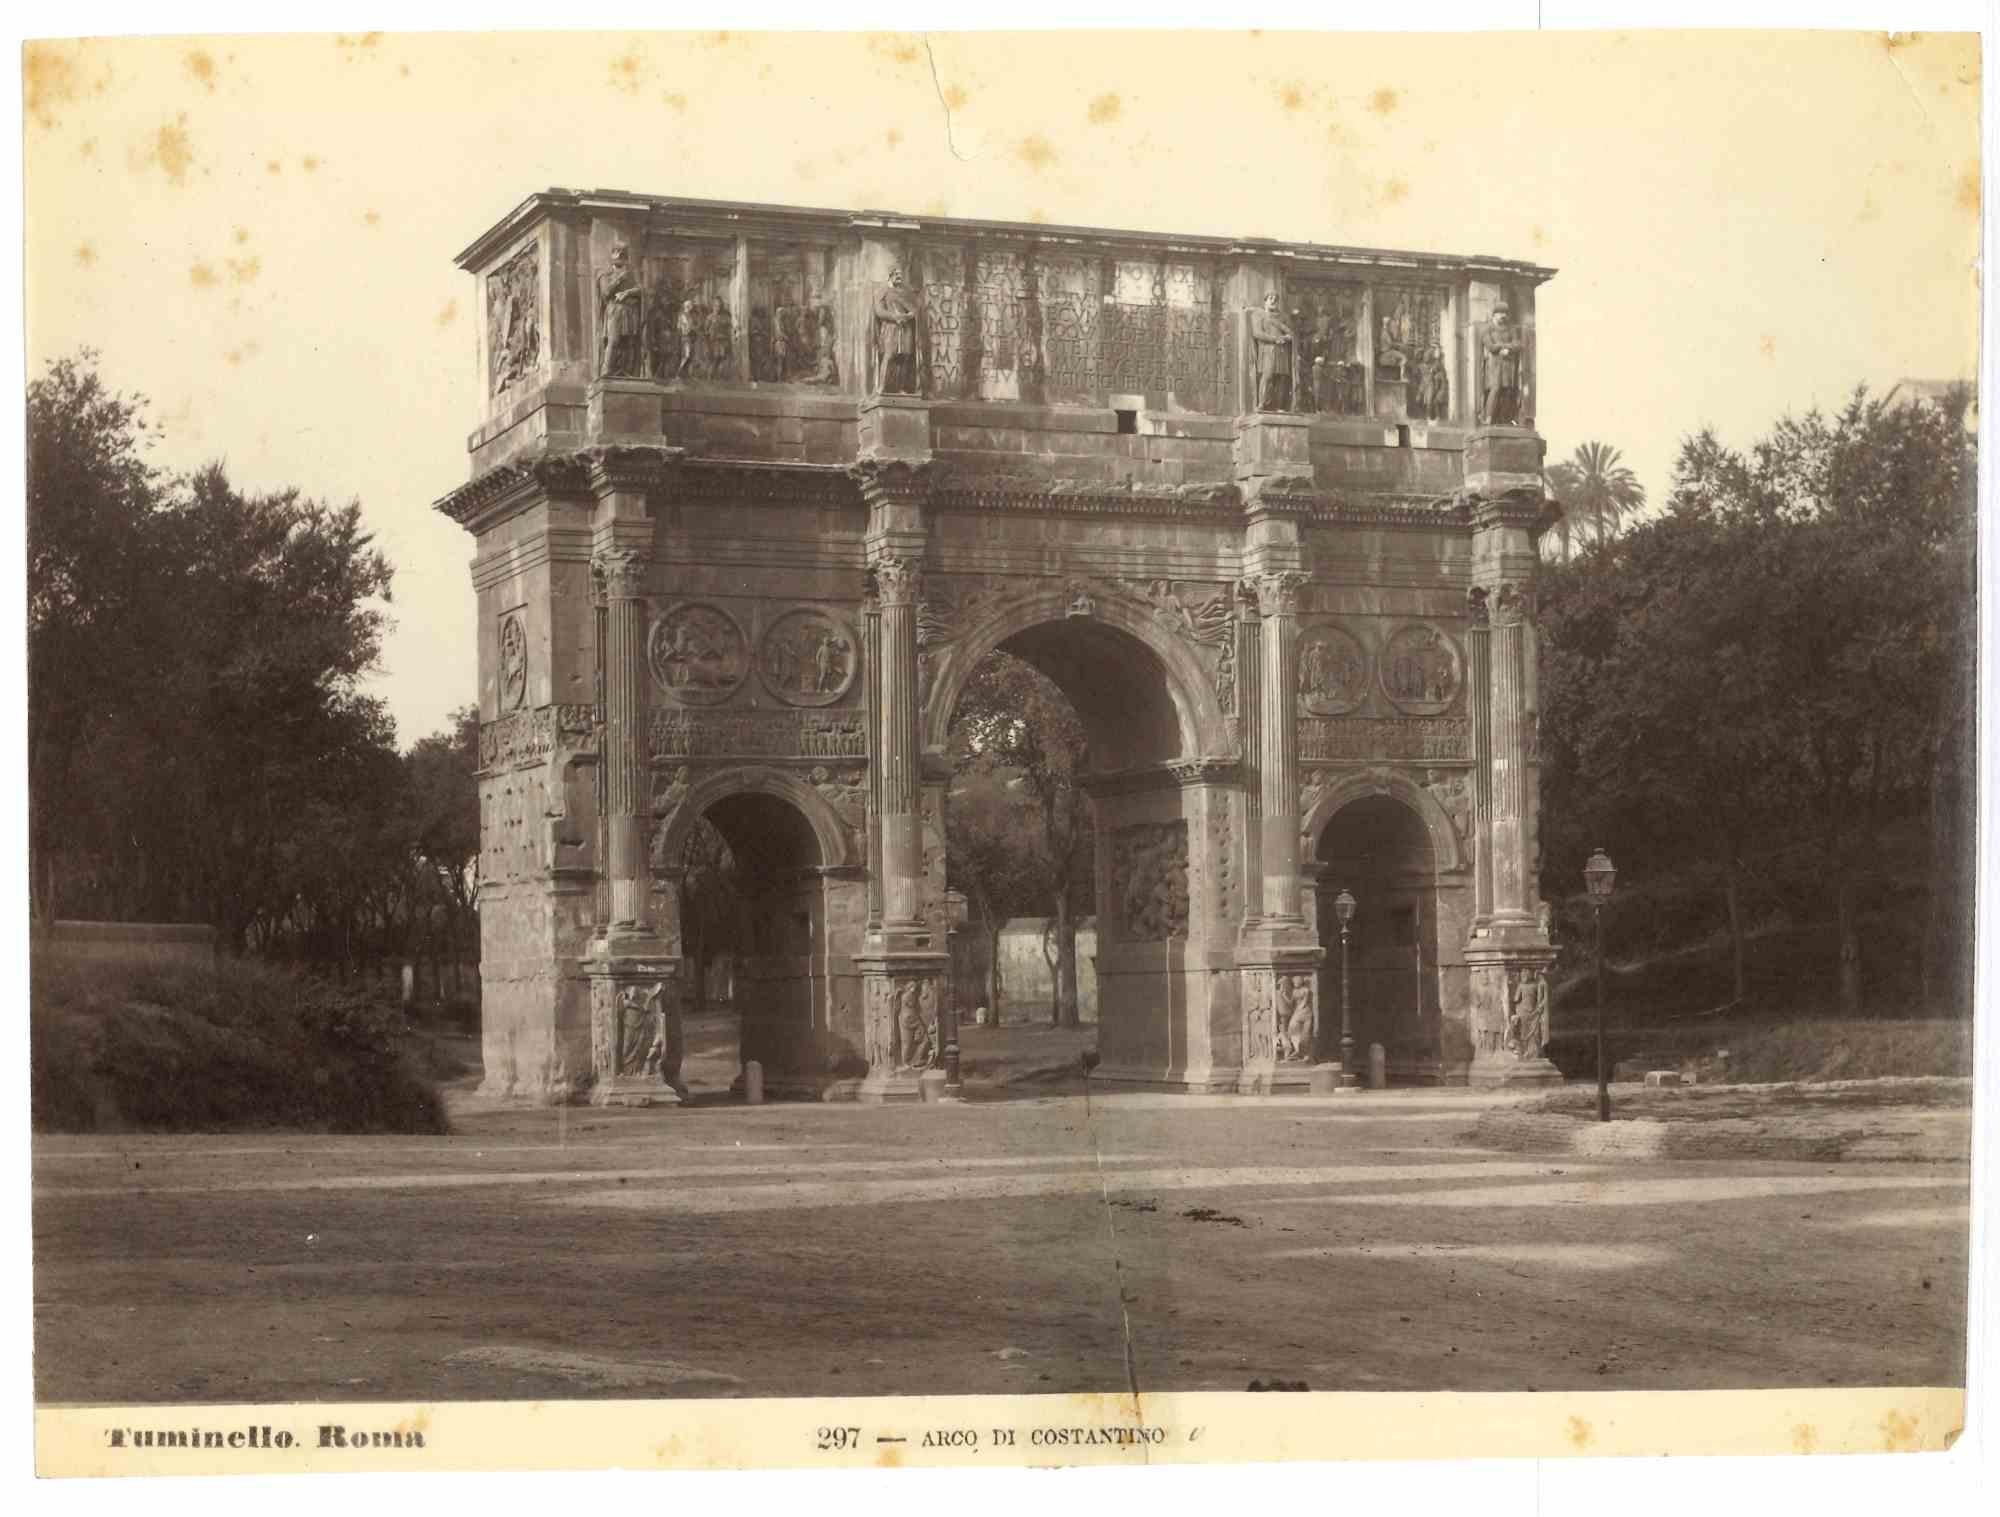 Arch of Constantine is a vintage print in salt silver realized by Ludovico Tuminello in the early 20th Century.

Titled on the lower.

Good conditions with some foxing.